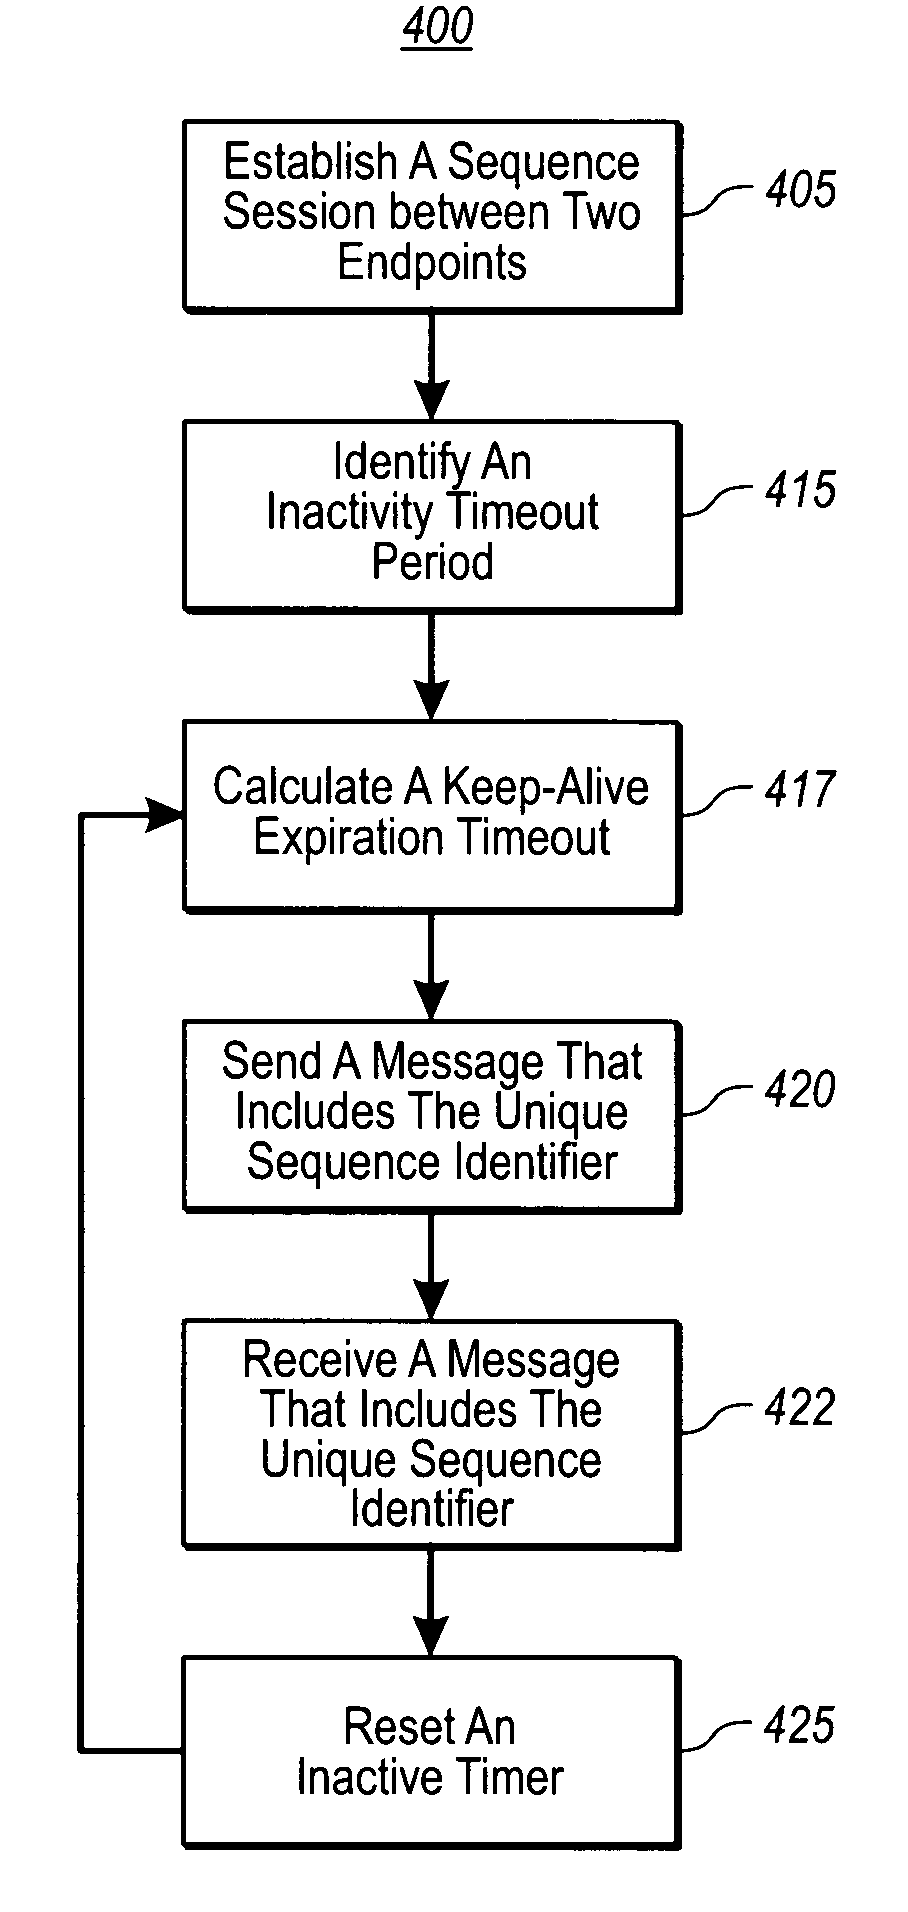 Verifying and maintaining connection liveliness in a reliable messaging for web services environment